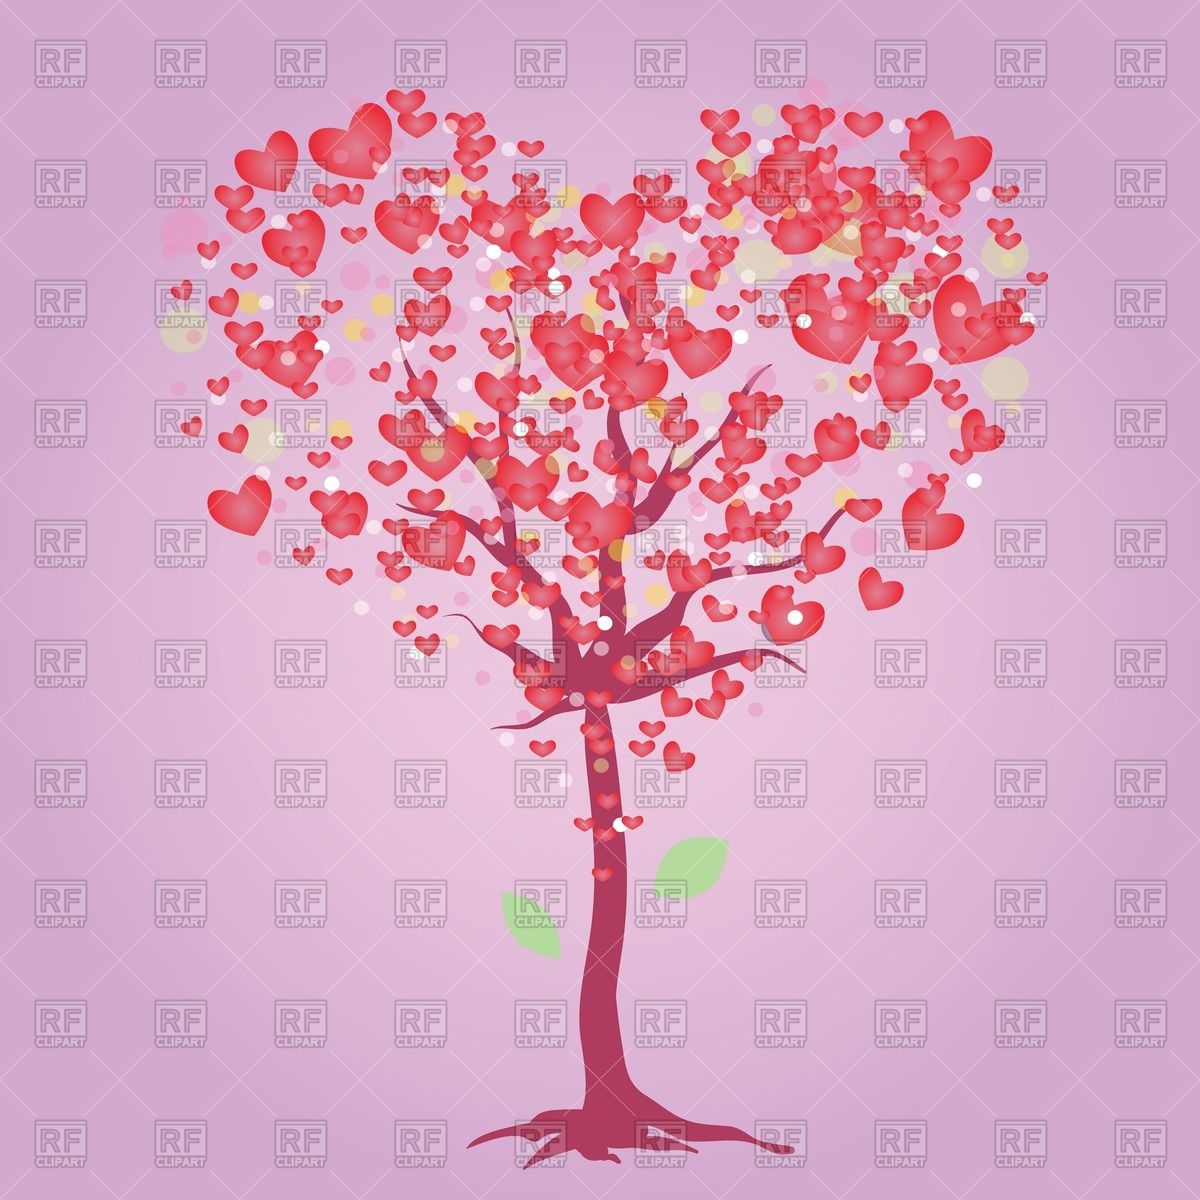 Heart Shaped Tree With Hearts Instead Of Leaves Download Royalty Free